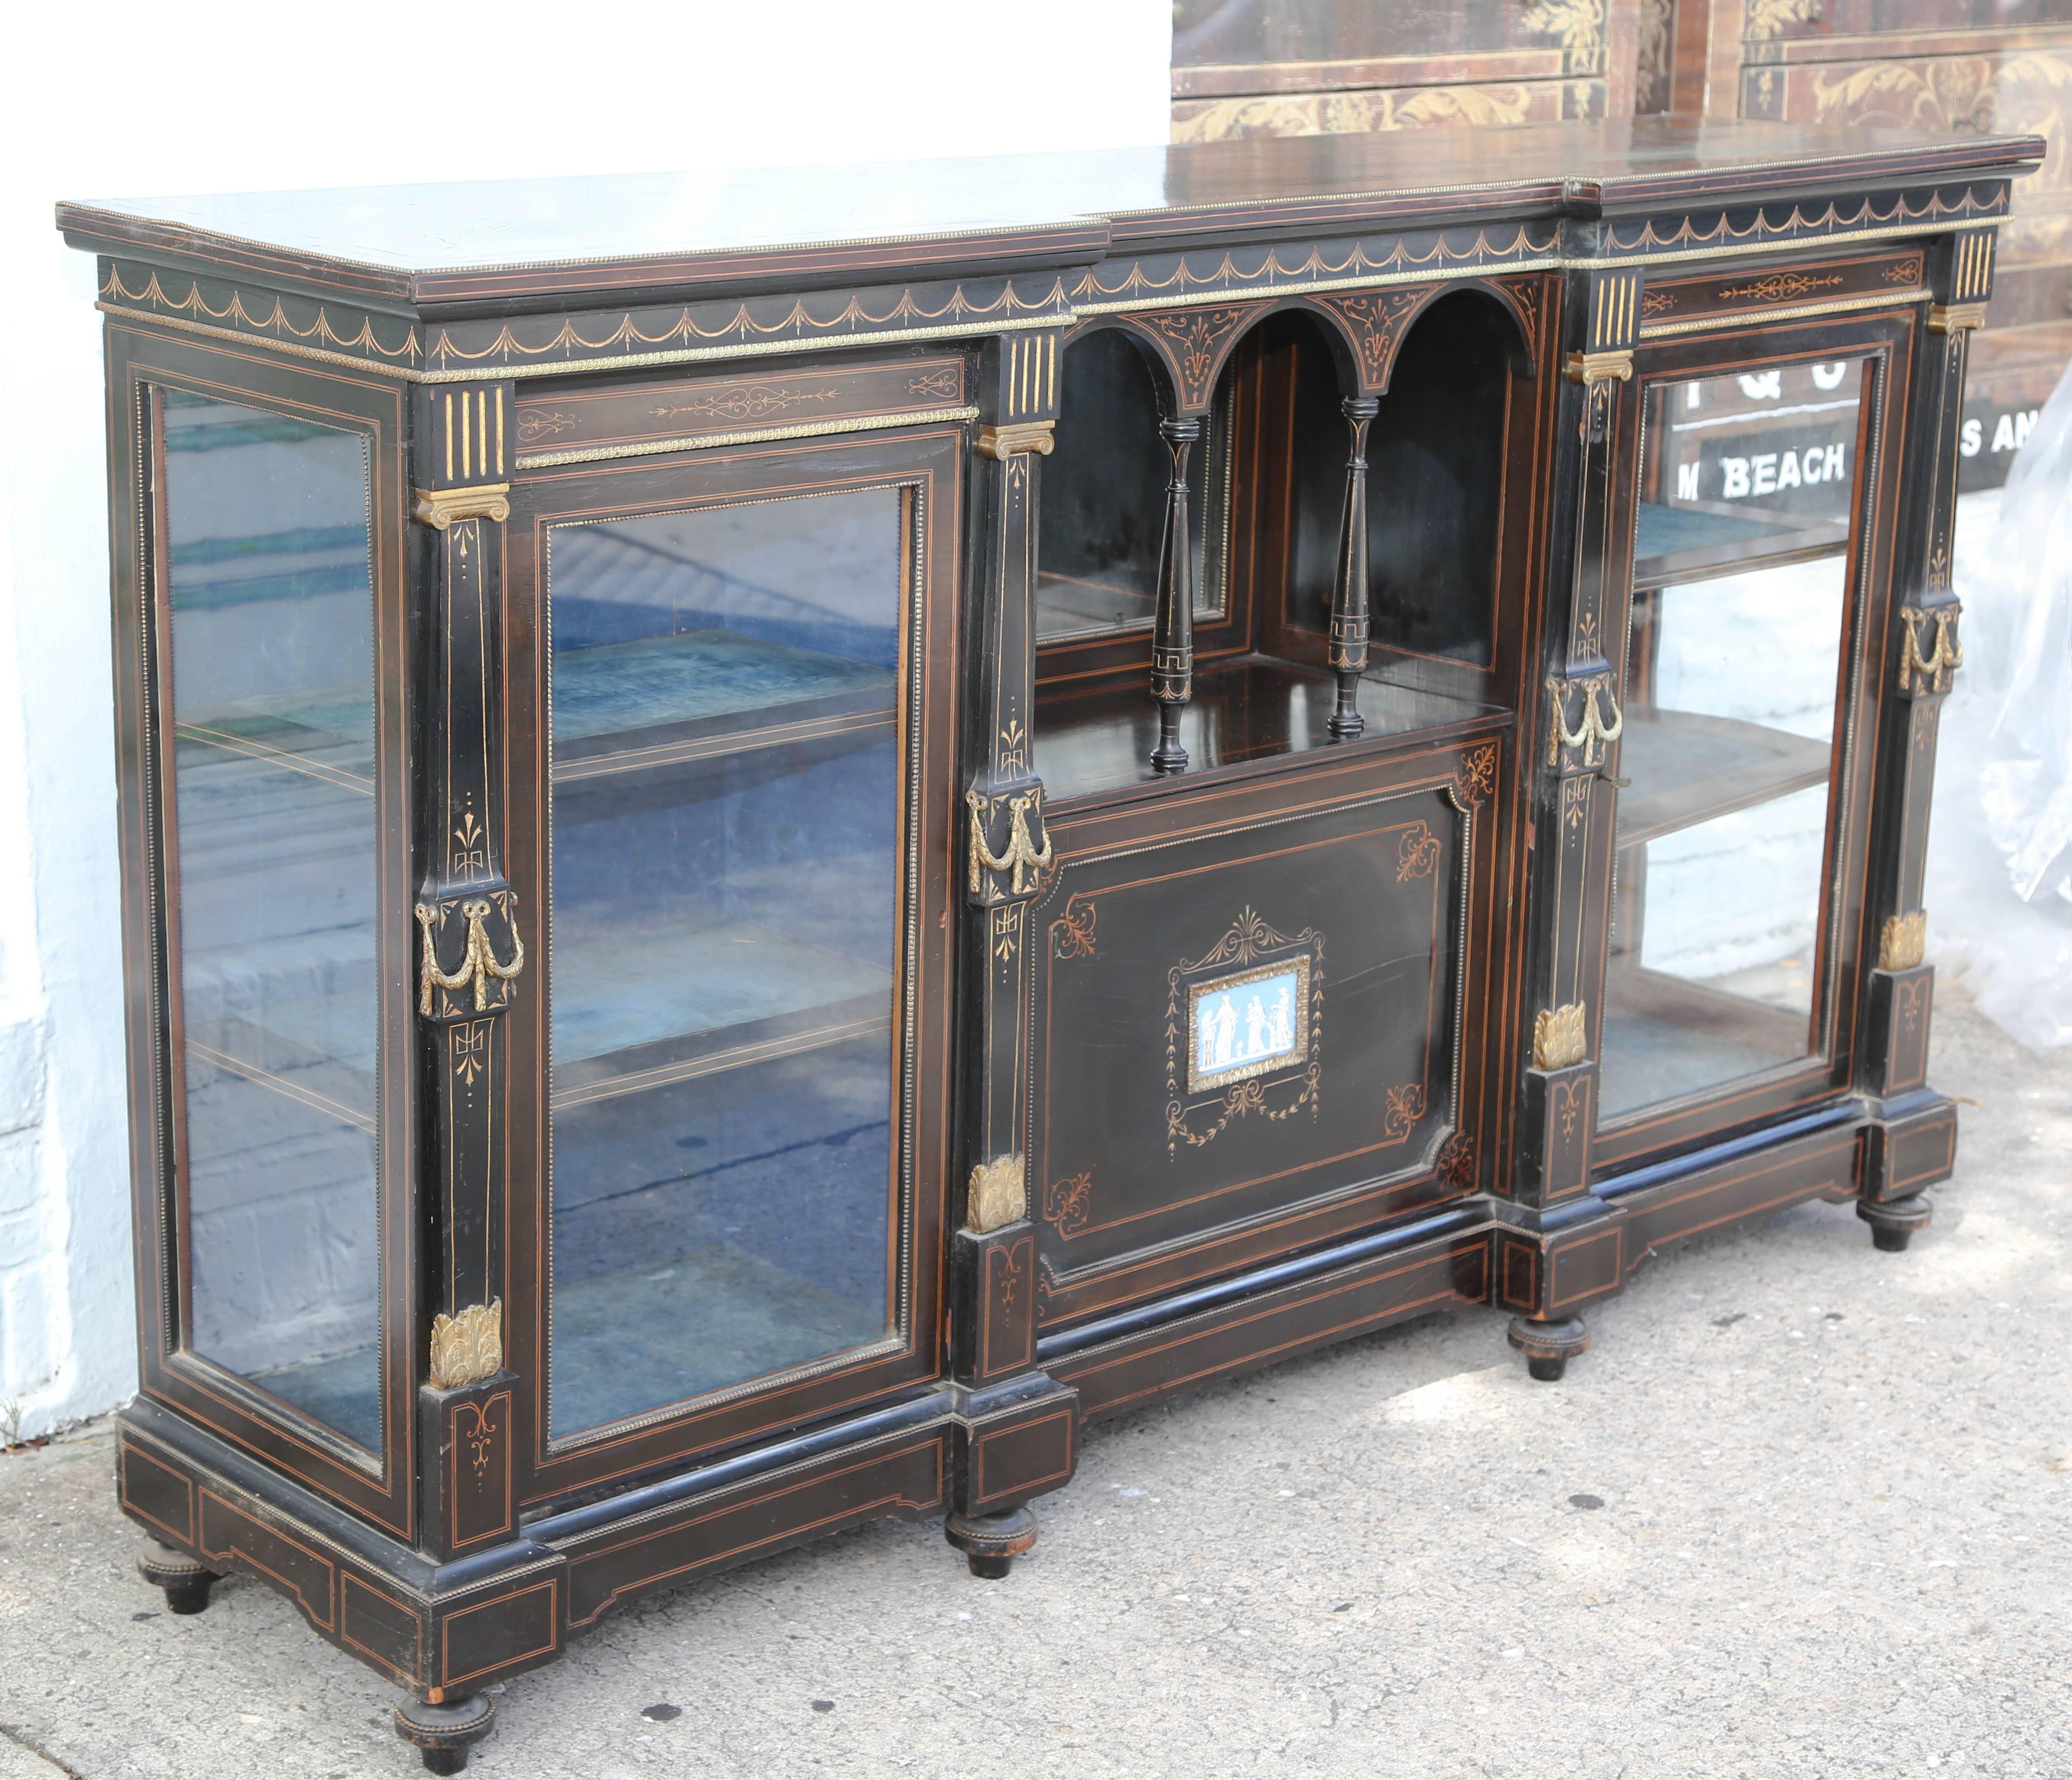 This is a superb quality credenza could have many uses server, cabinet etc.
Its ebony with brass work satinwood inlay also having a Wedge wood plaque to the center door.
Round the top there are swags and tails, also to the top there is satinwood